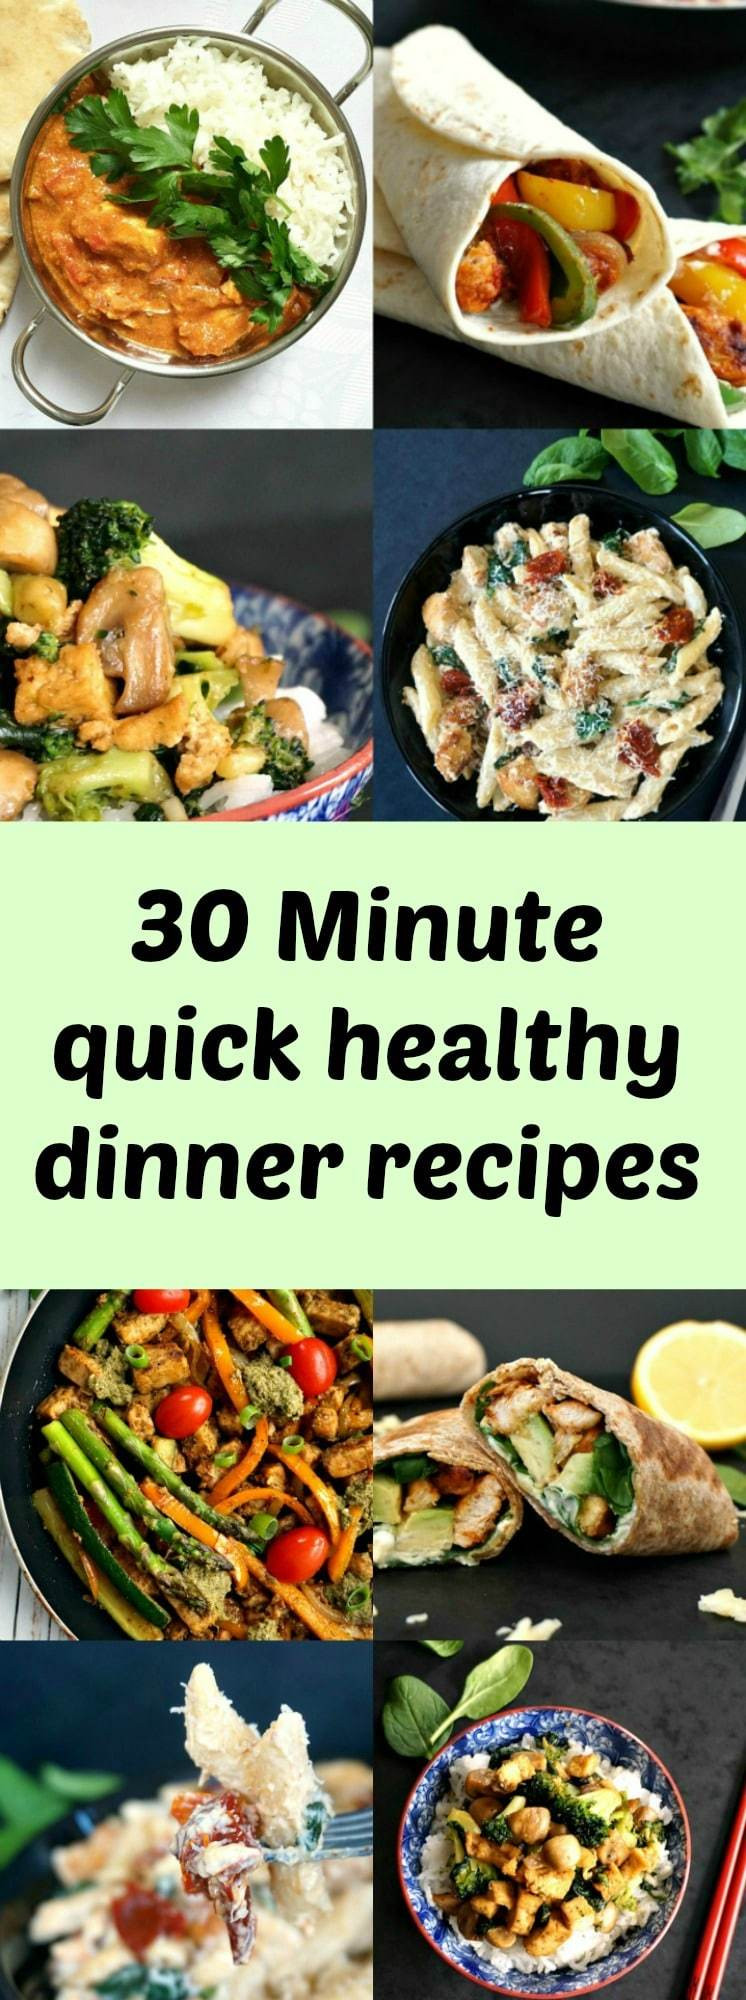 Healthy 30 Minute Meals
 Top 28 30 Minute Dinner Recipes pineapple chicken 30